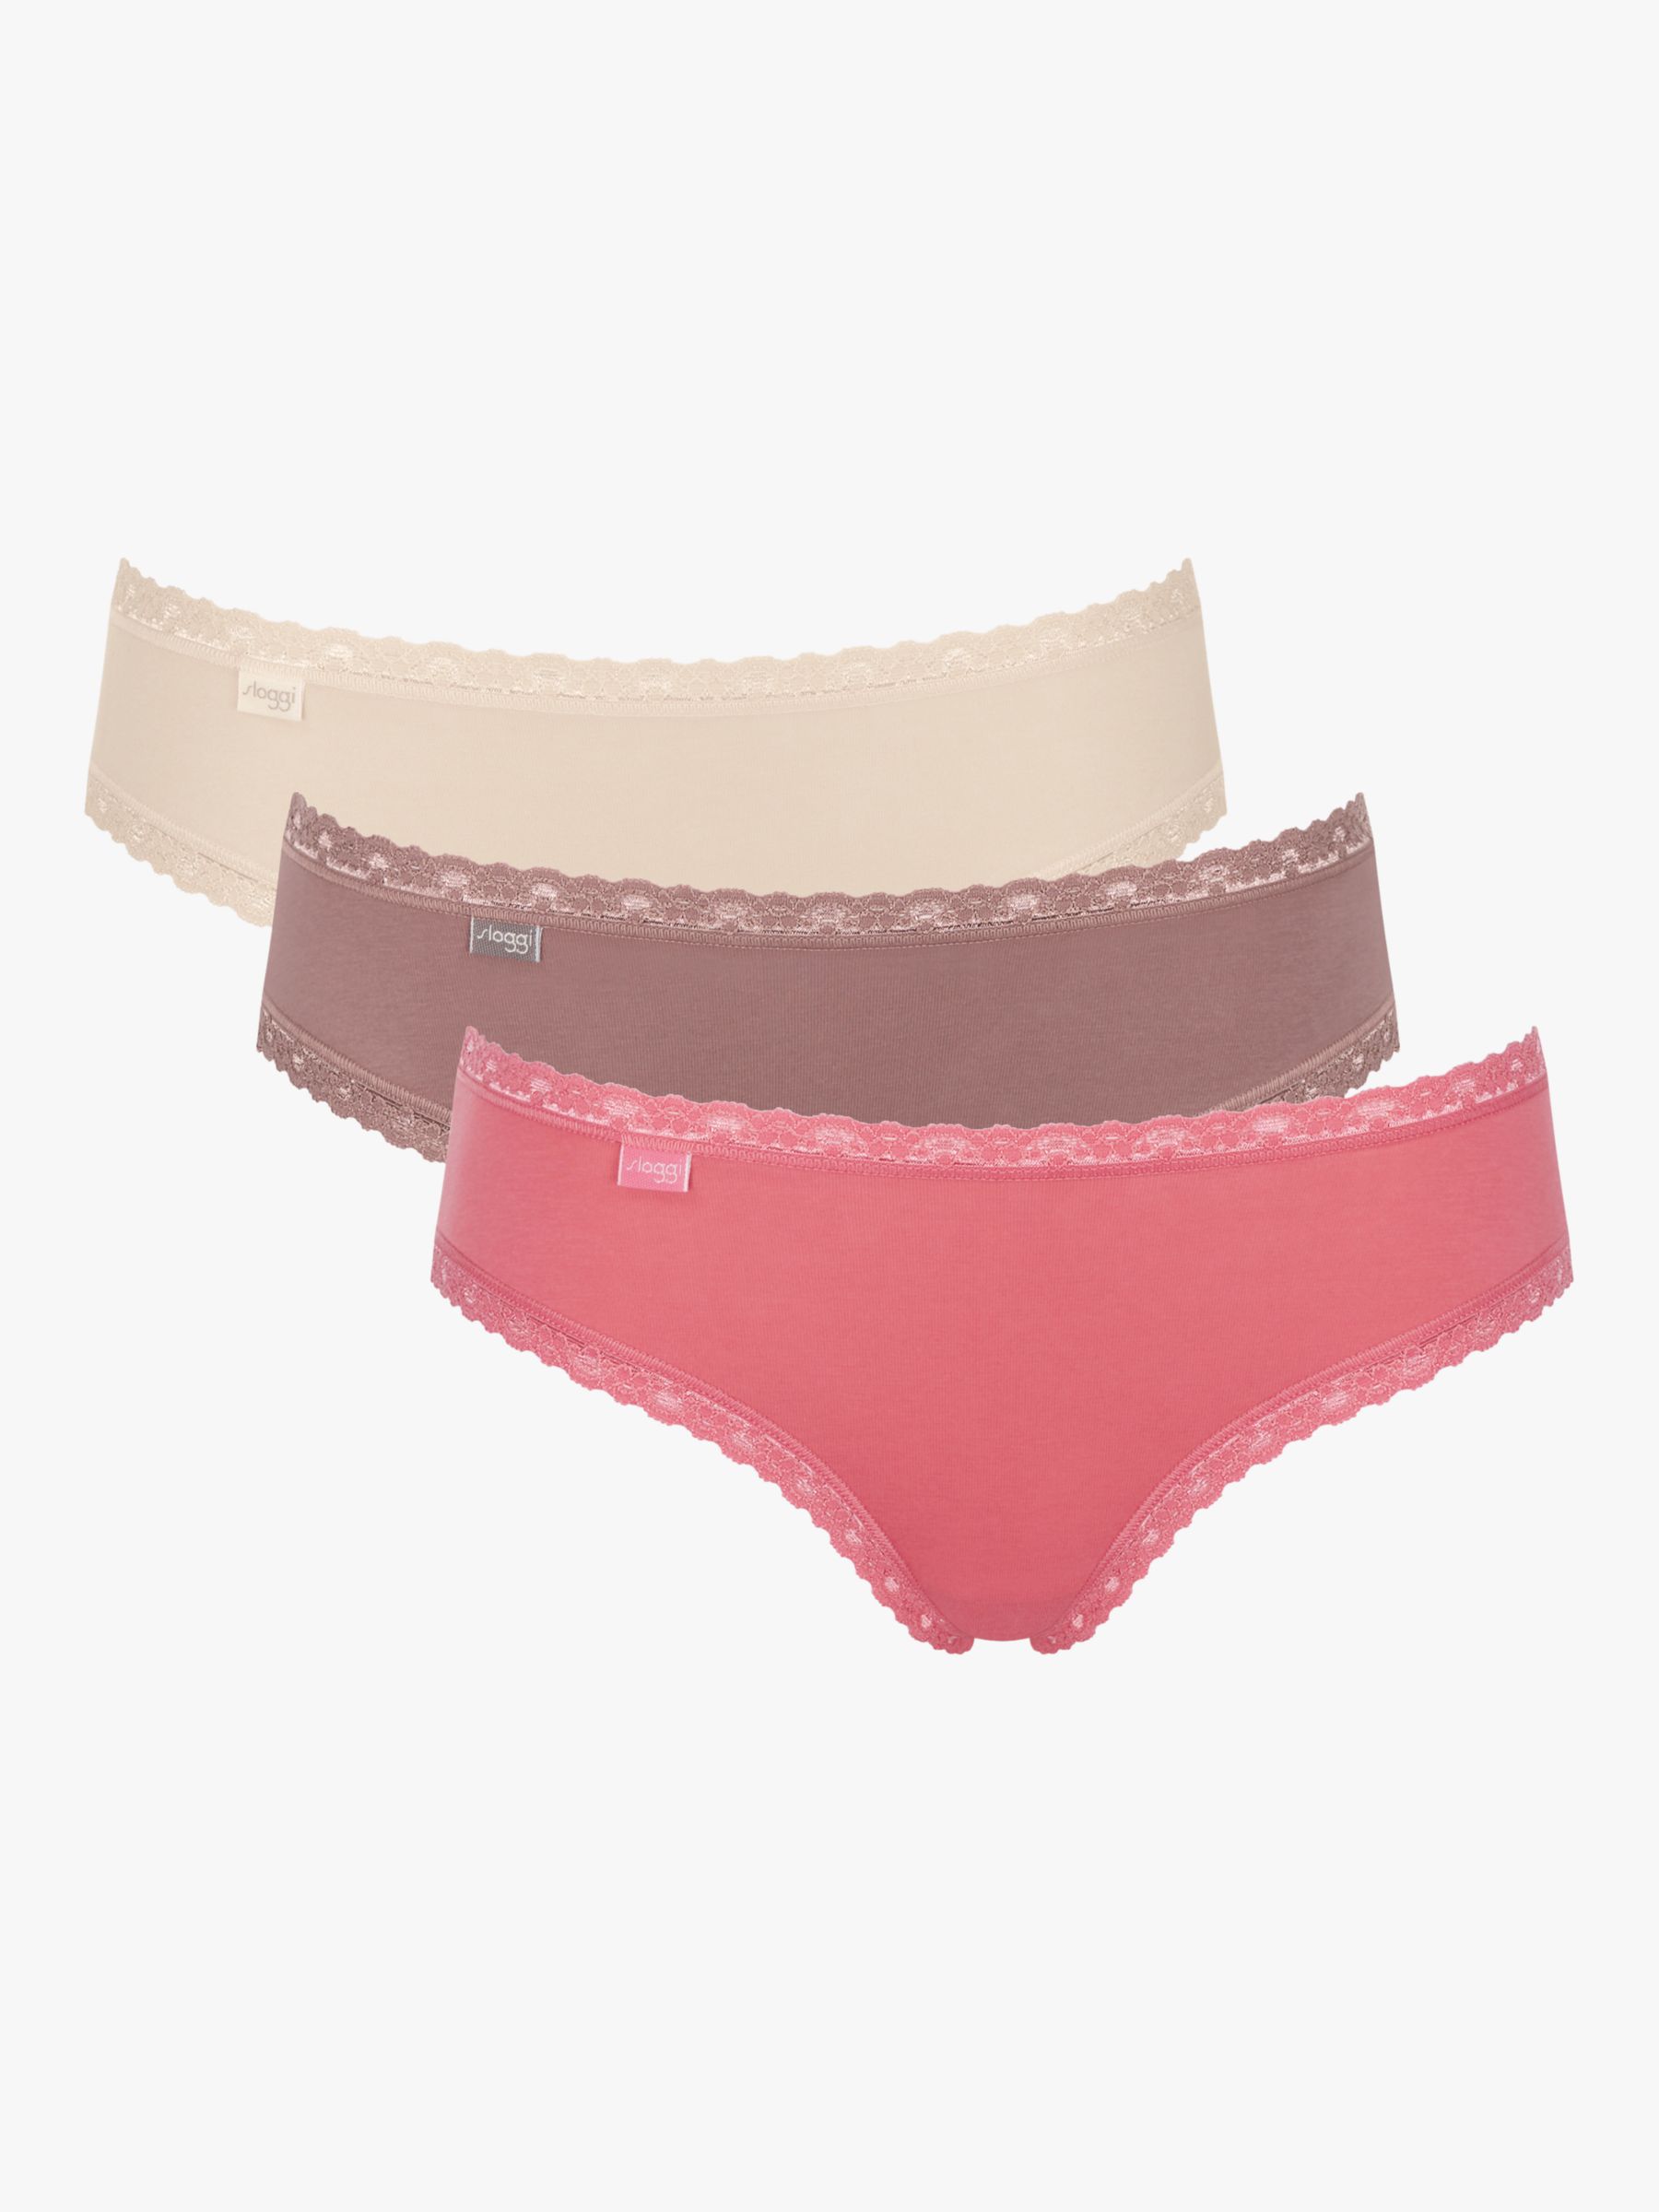 sloggi 24/7 Weekend Hipster Knickers, Pack of 3, Multiple Colours 7, 8